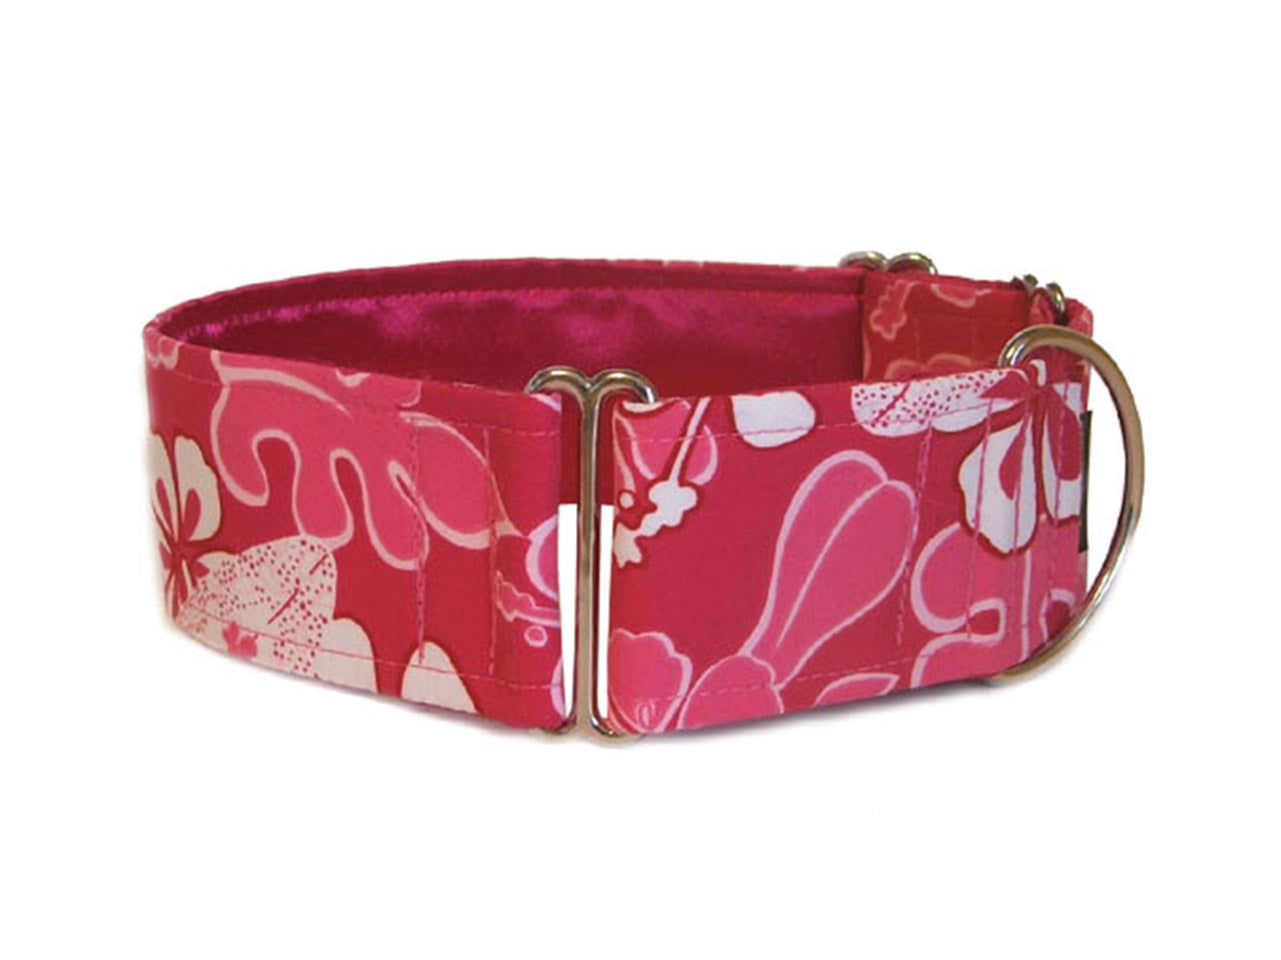 Hot pink Hawaiian flower print is beach and pool ready for the hang-loose hound!